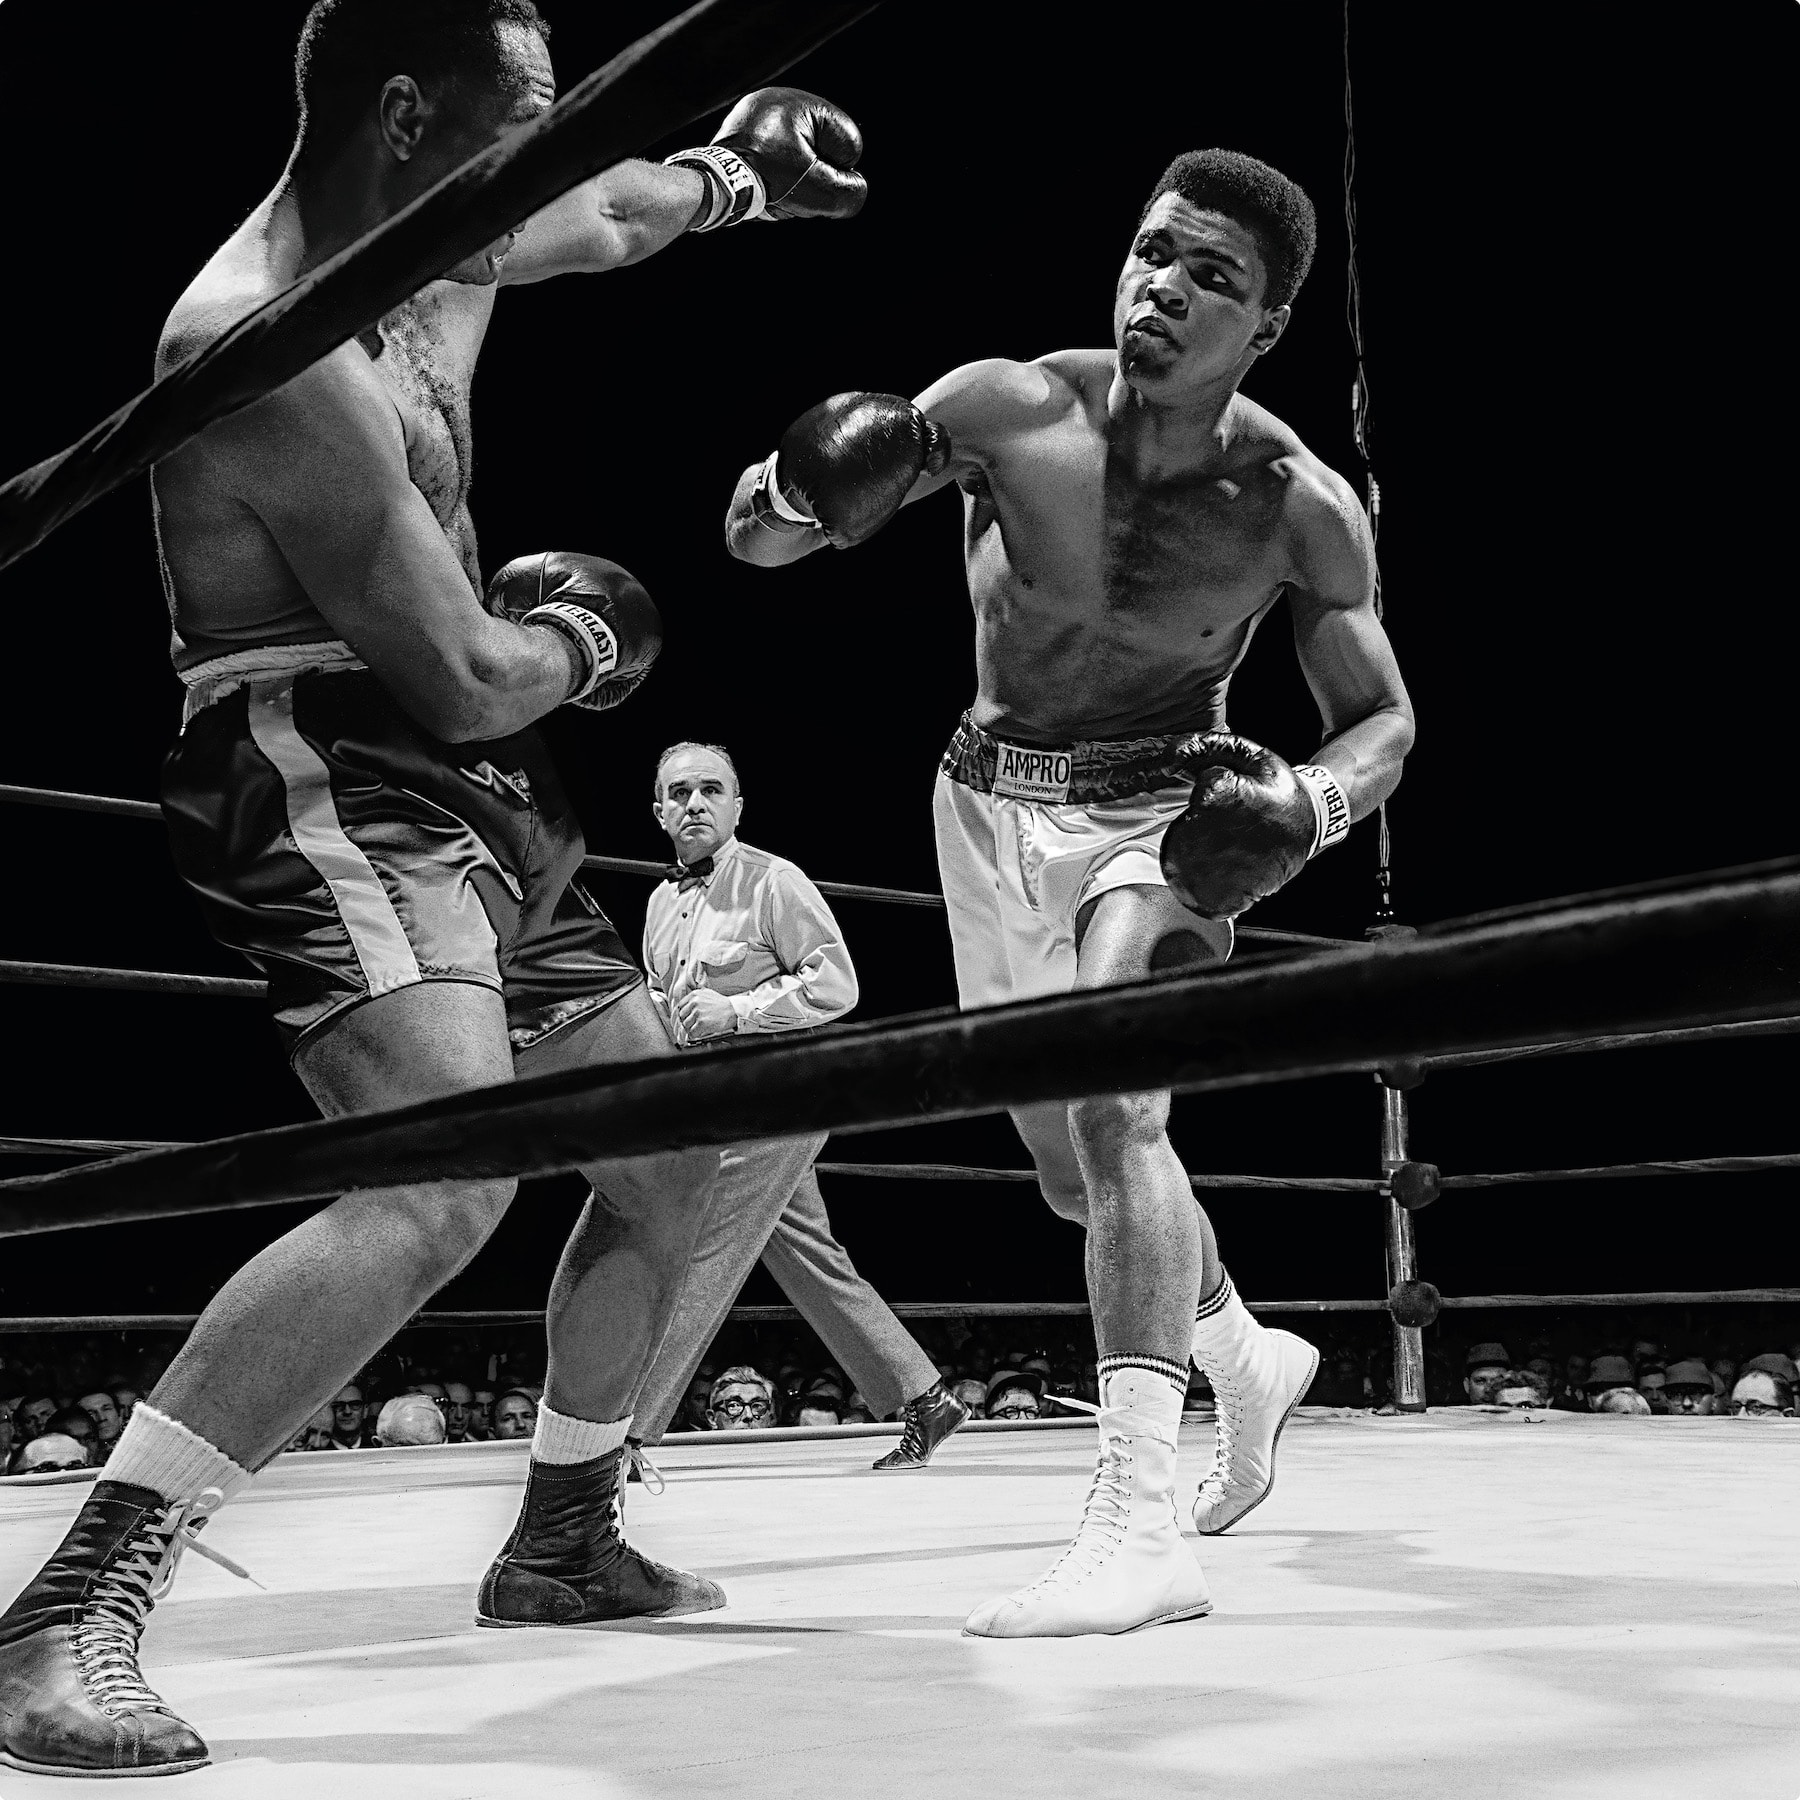 TASCHEN 推出收藏版新書《Neil Leifer. Boxing. 60 Years of Fights and Fighters》